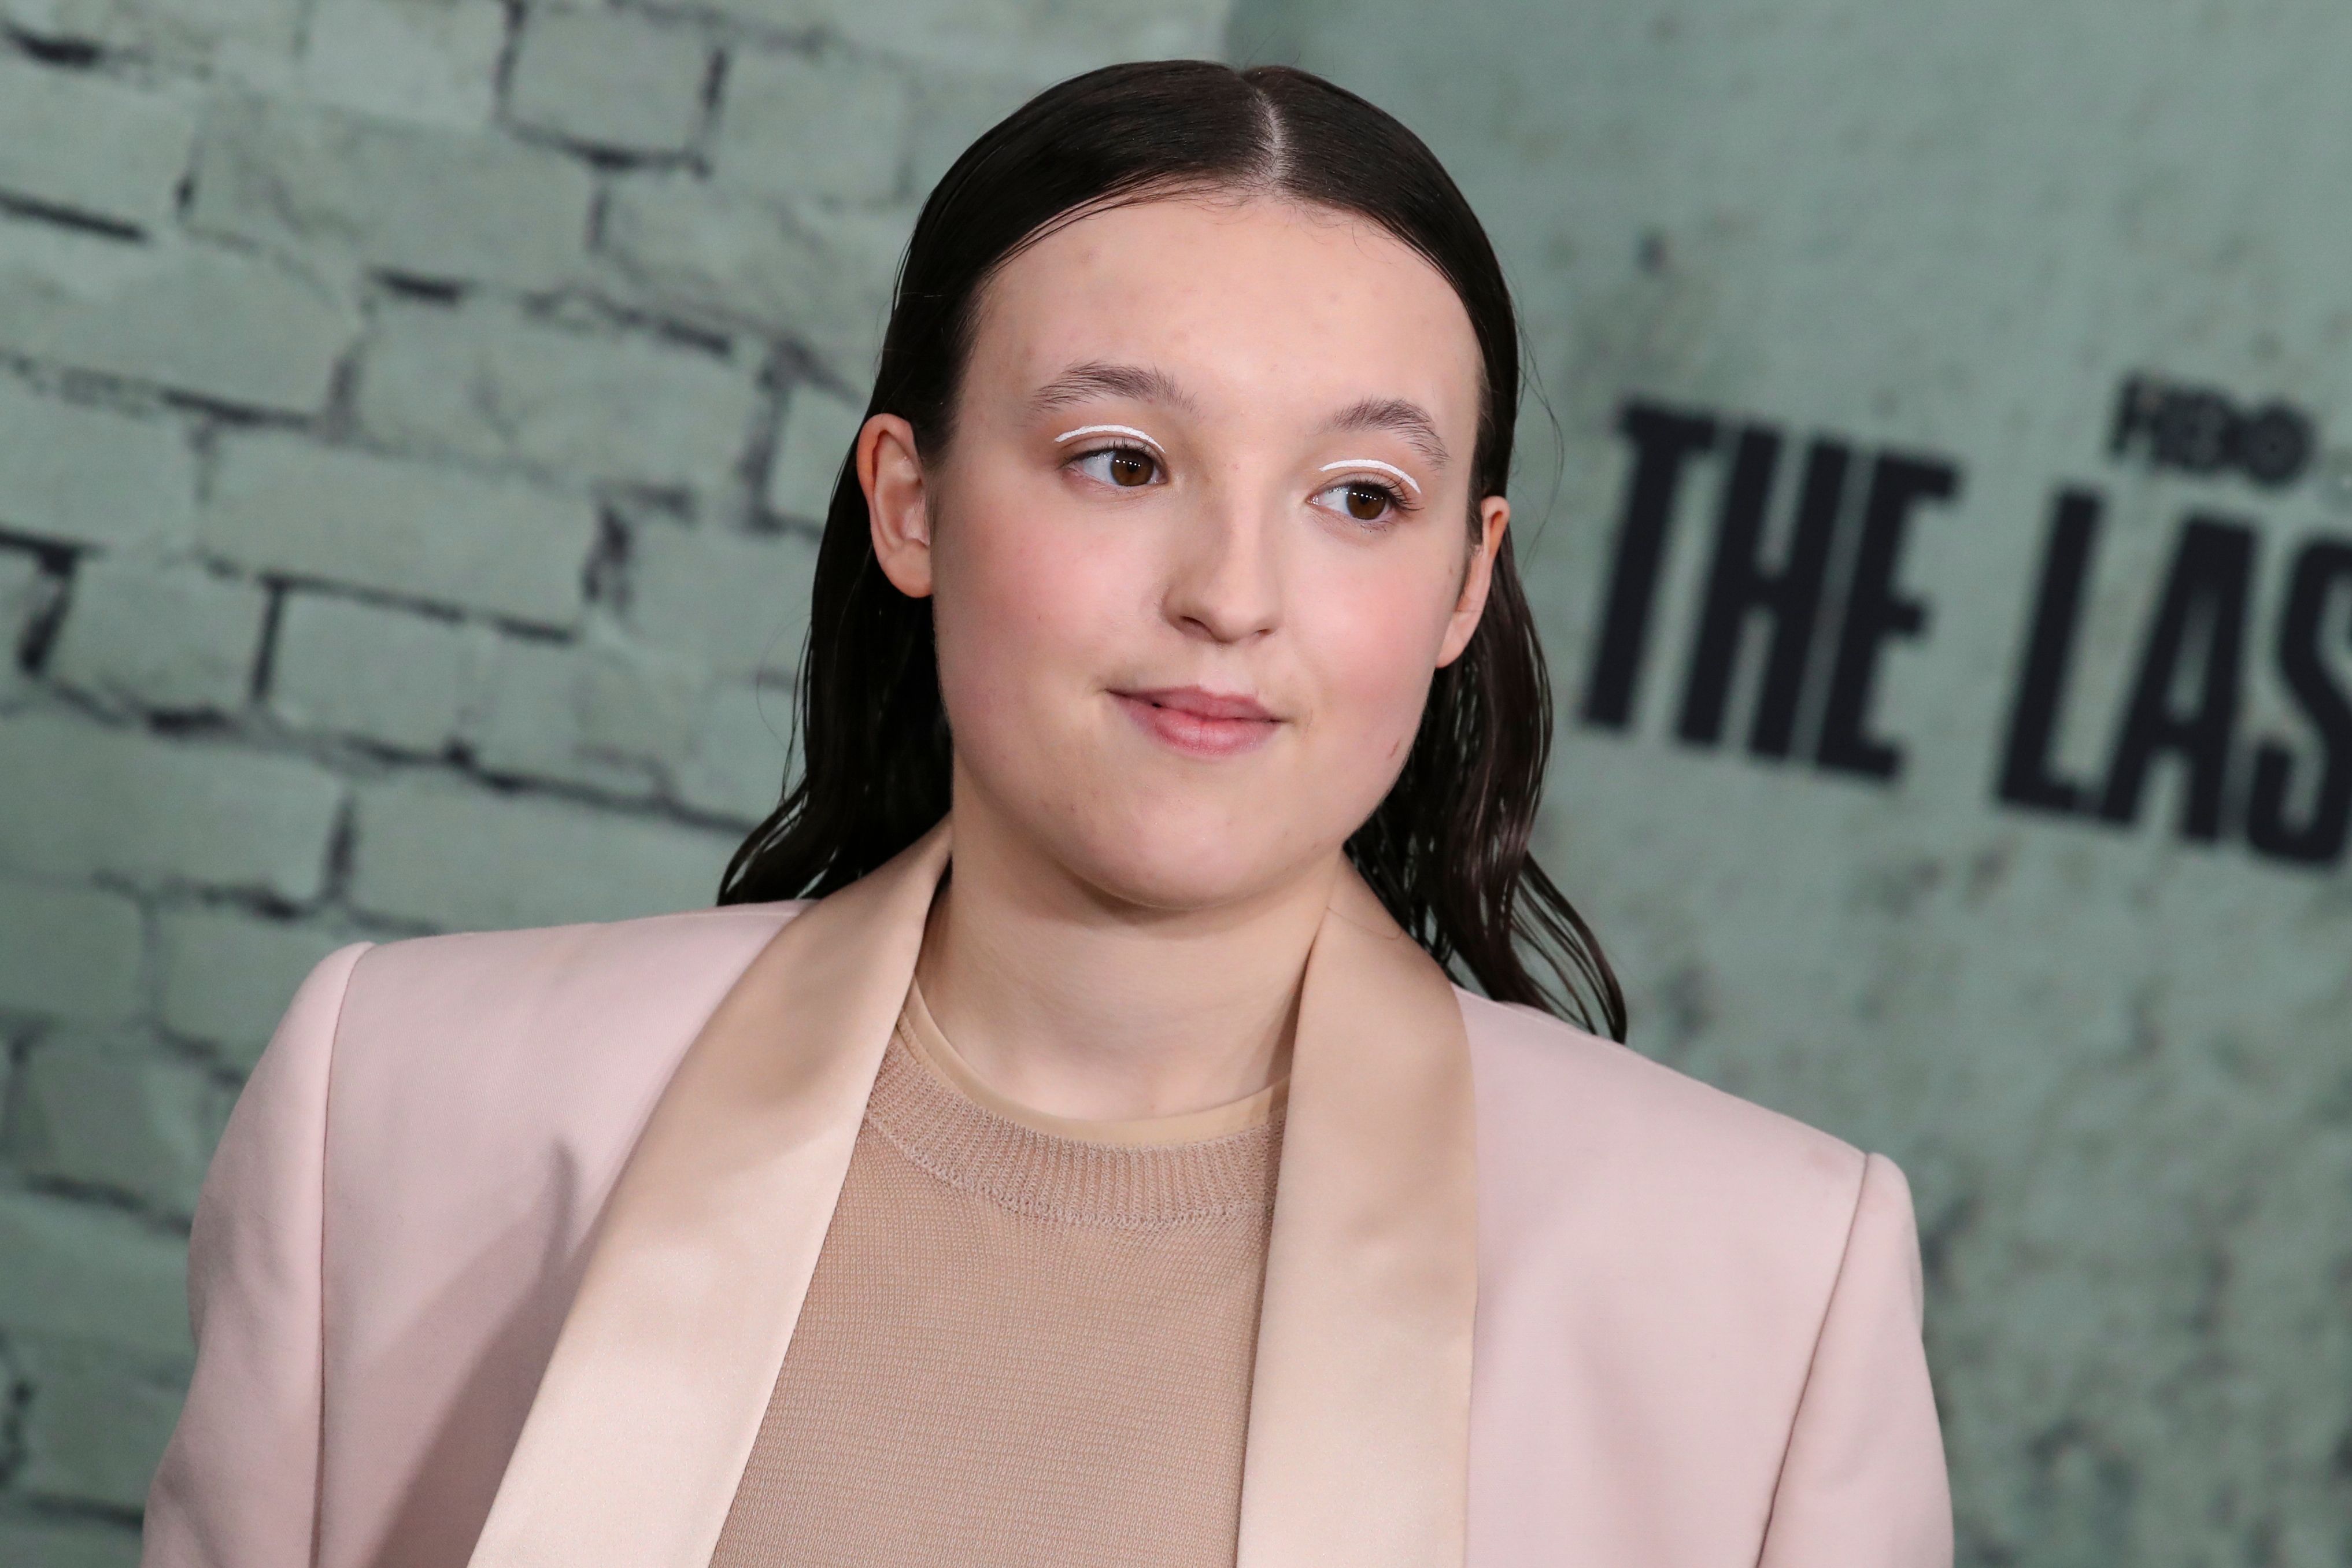 The Last of Us Star Bella Ramsey Opens Up About Gender Identity